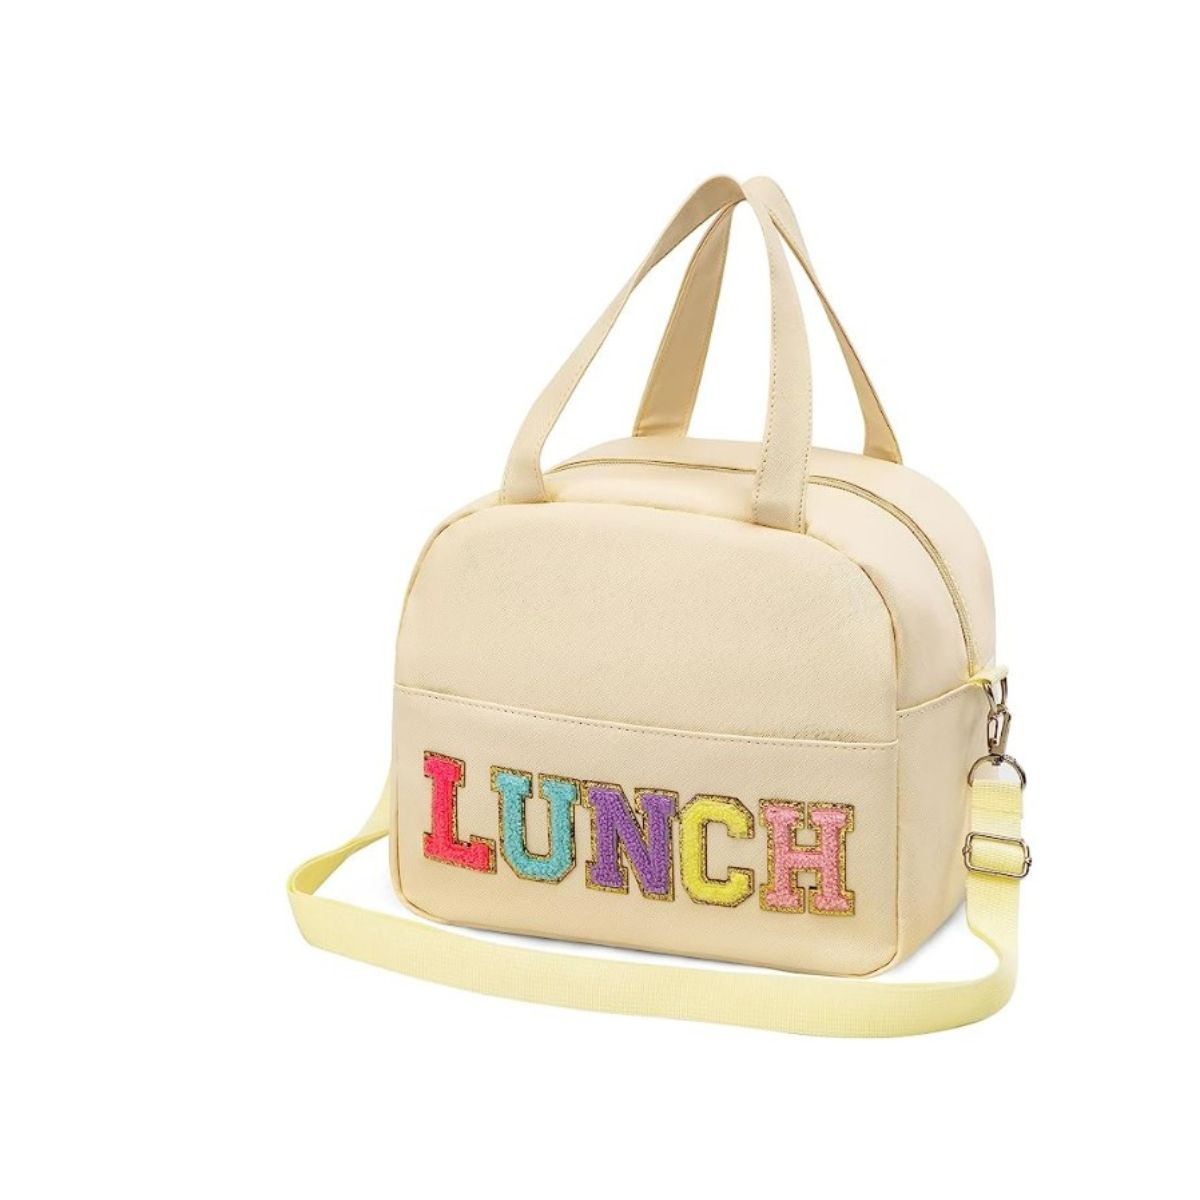 Cream insulated lunch box that says LUNCH